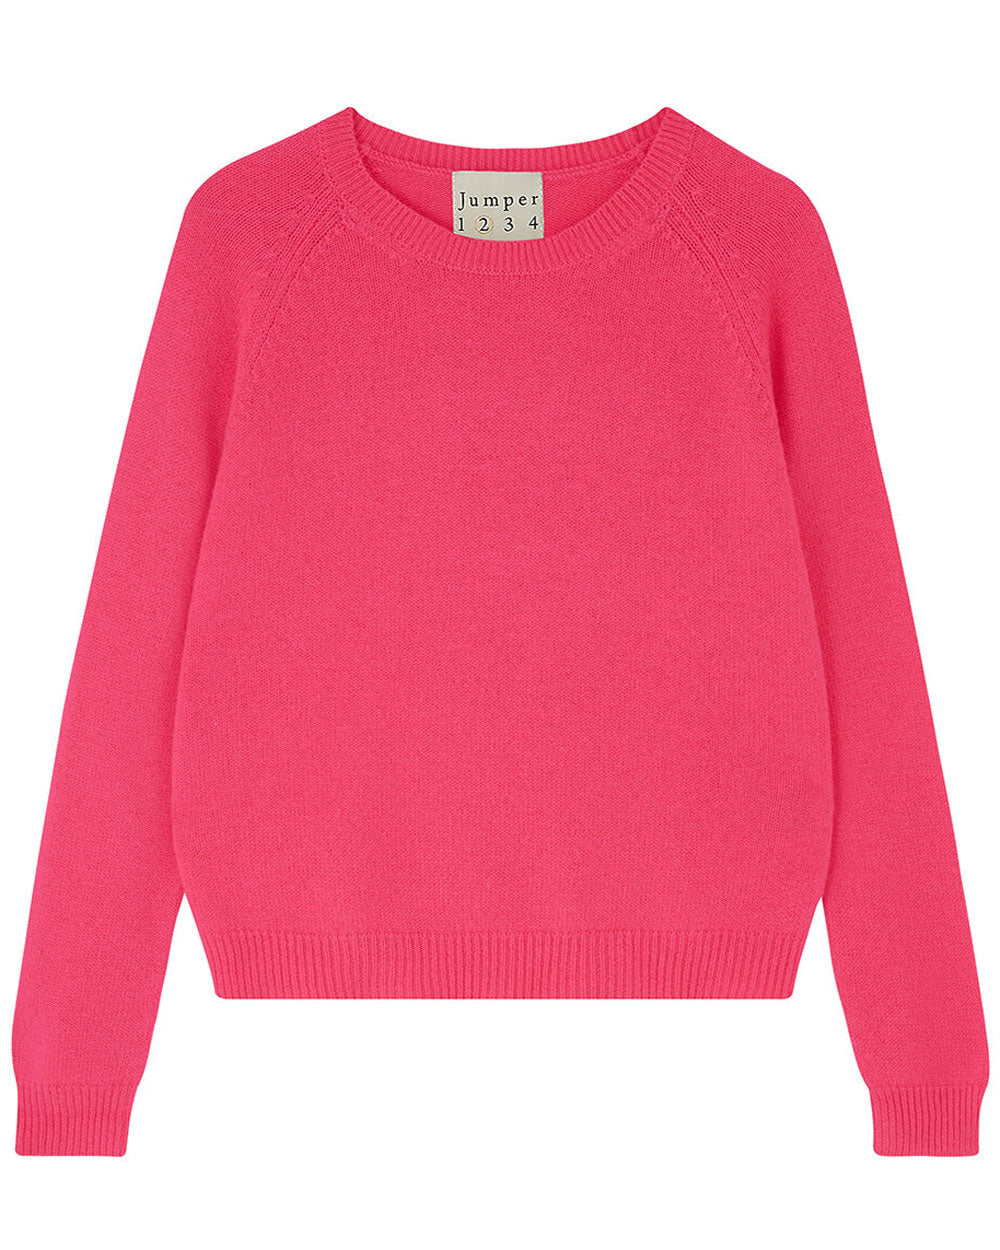 Neon Pink Cropped Crew Neck Sweater